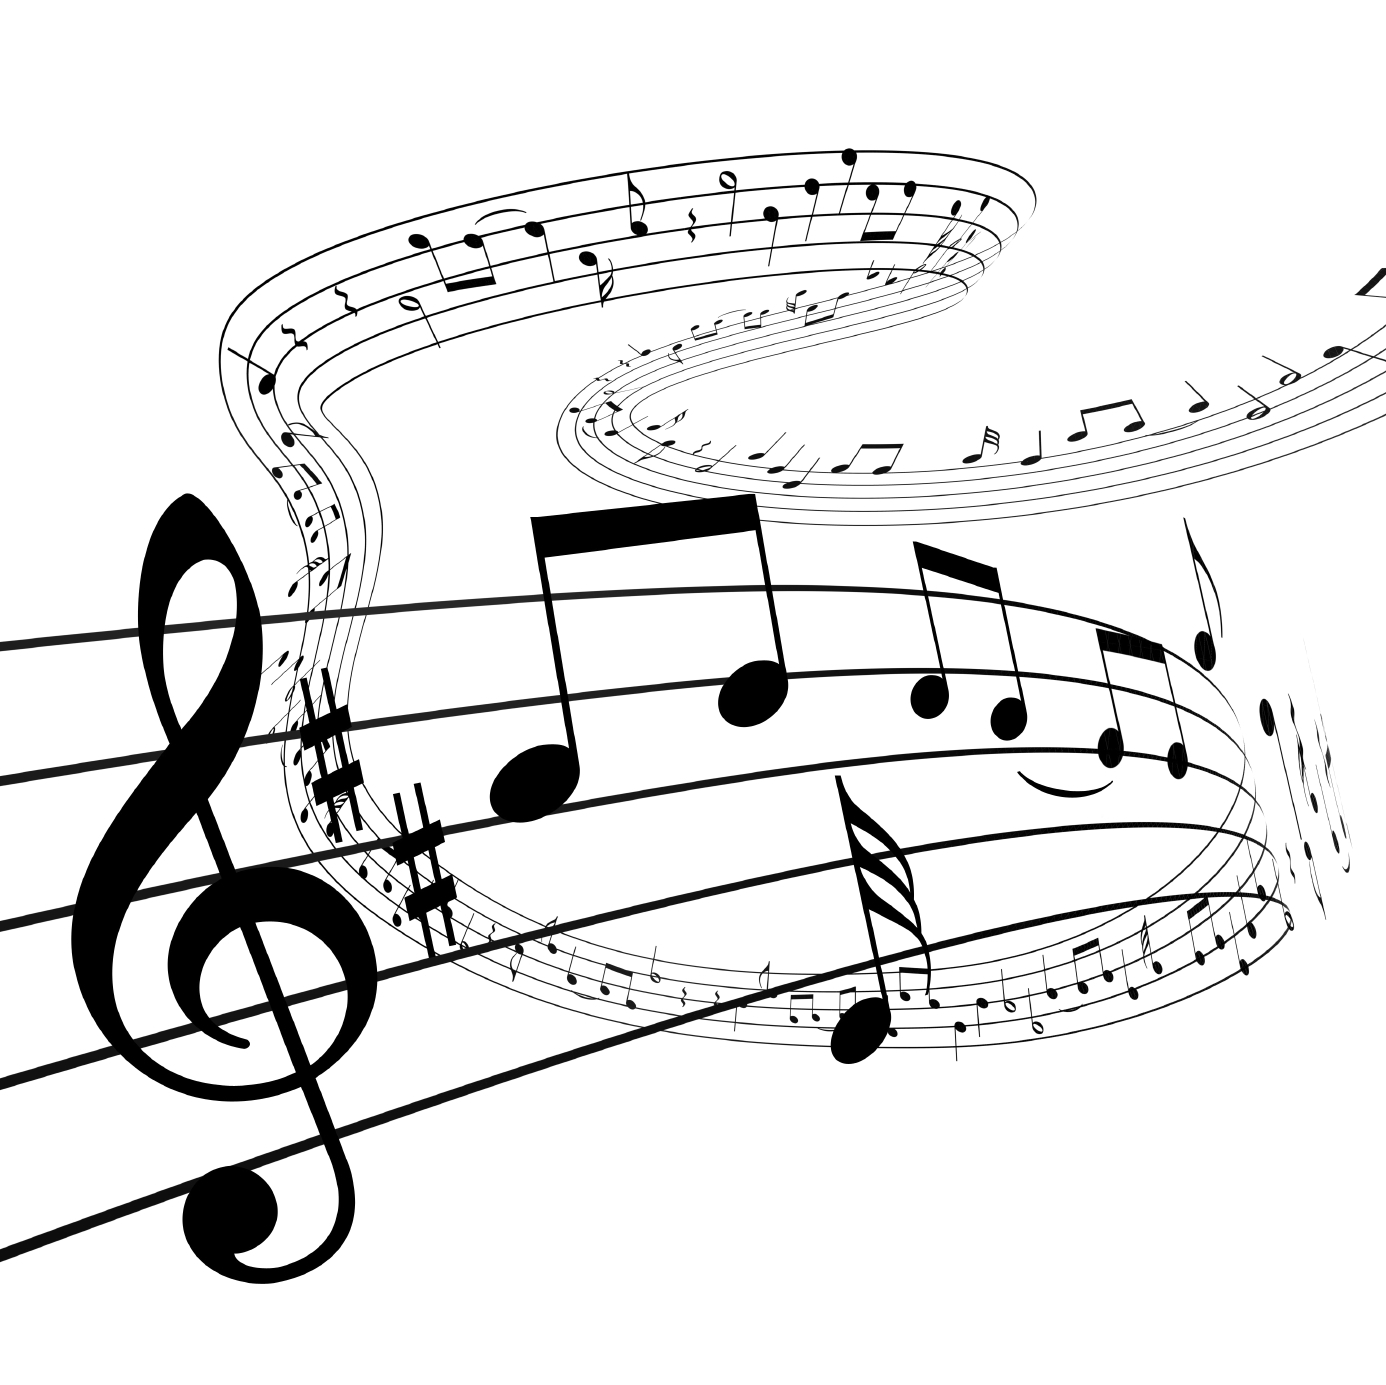 Music represented as musical notes